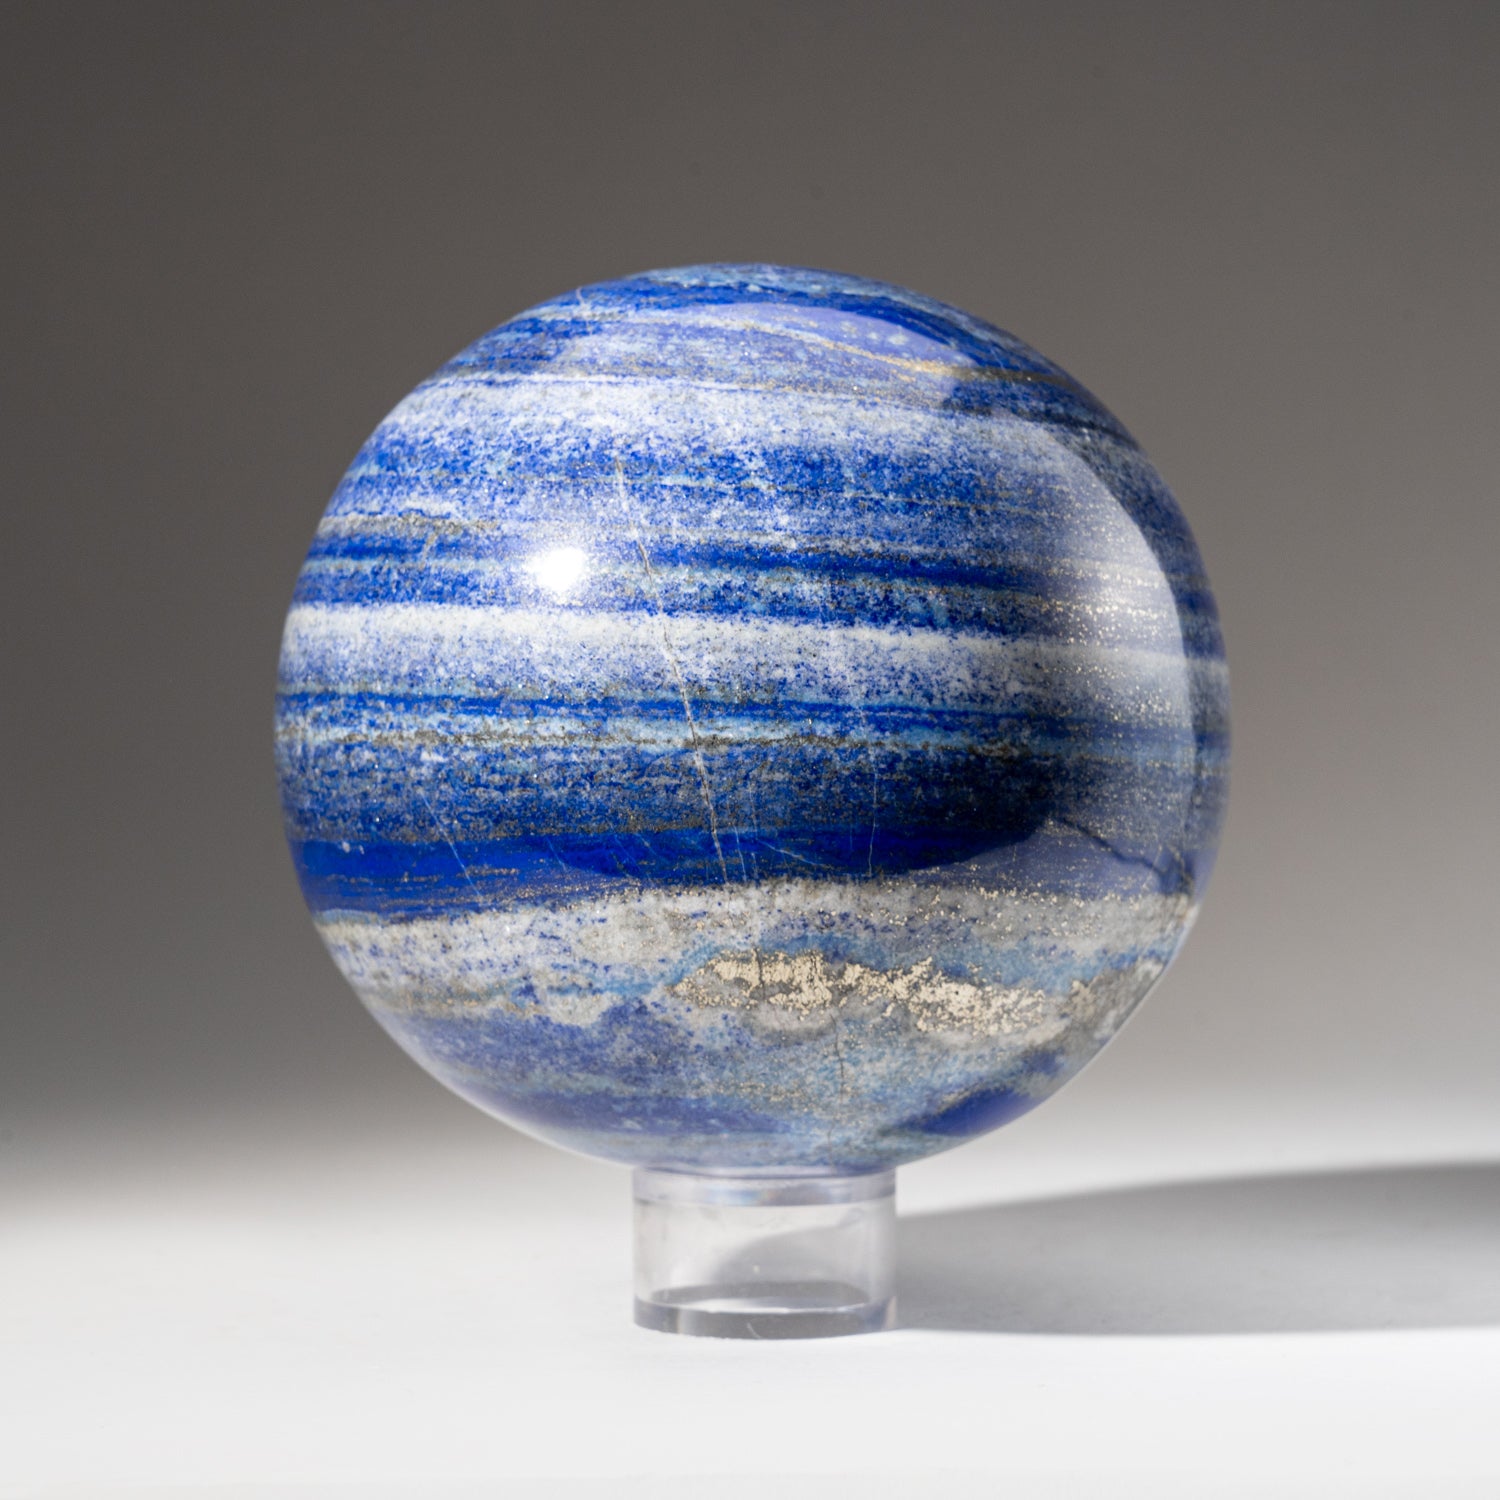 Polished Lapis Lazuli Sphere from Afghanistan (5.5", 11.5 lbs)